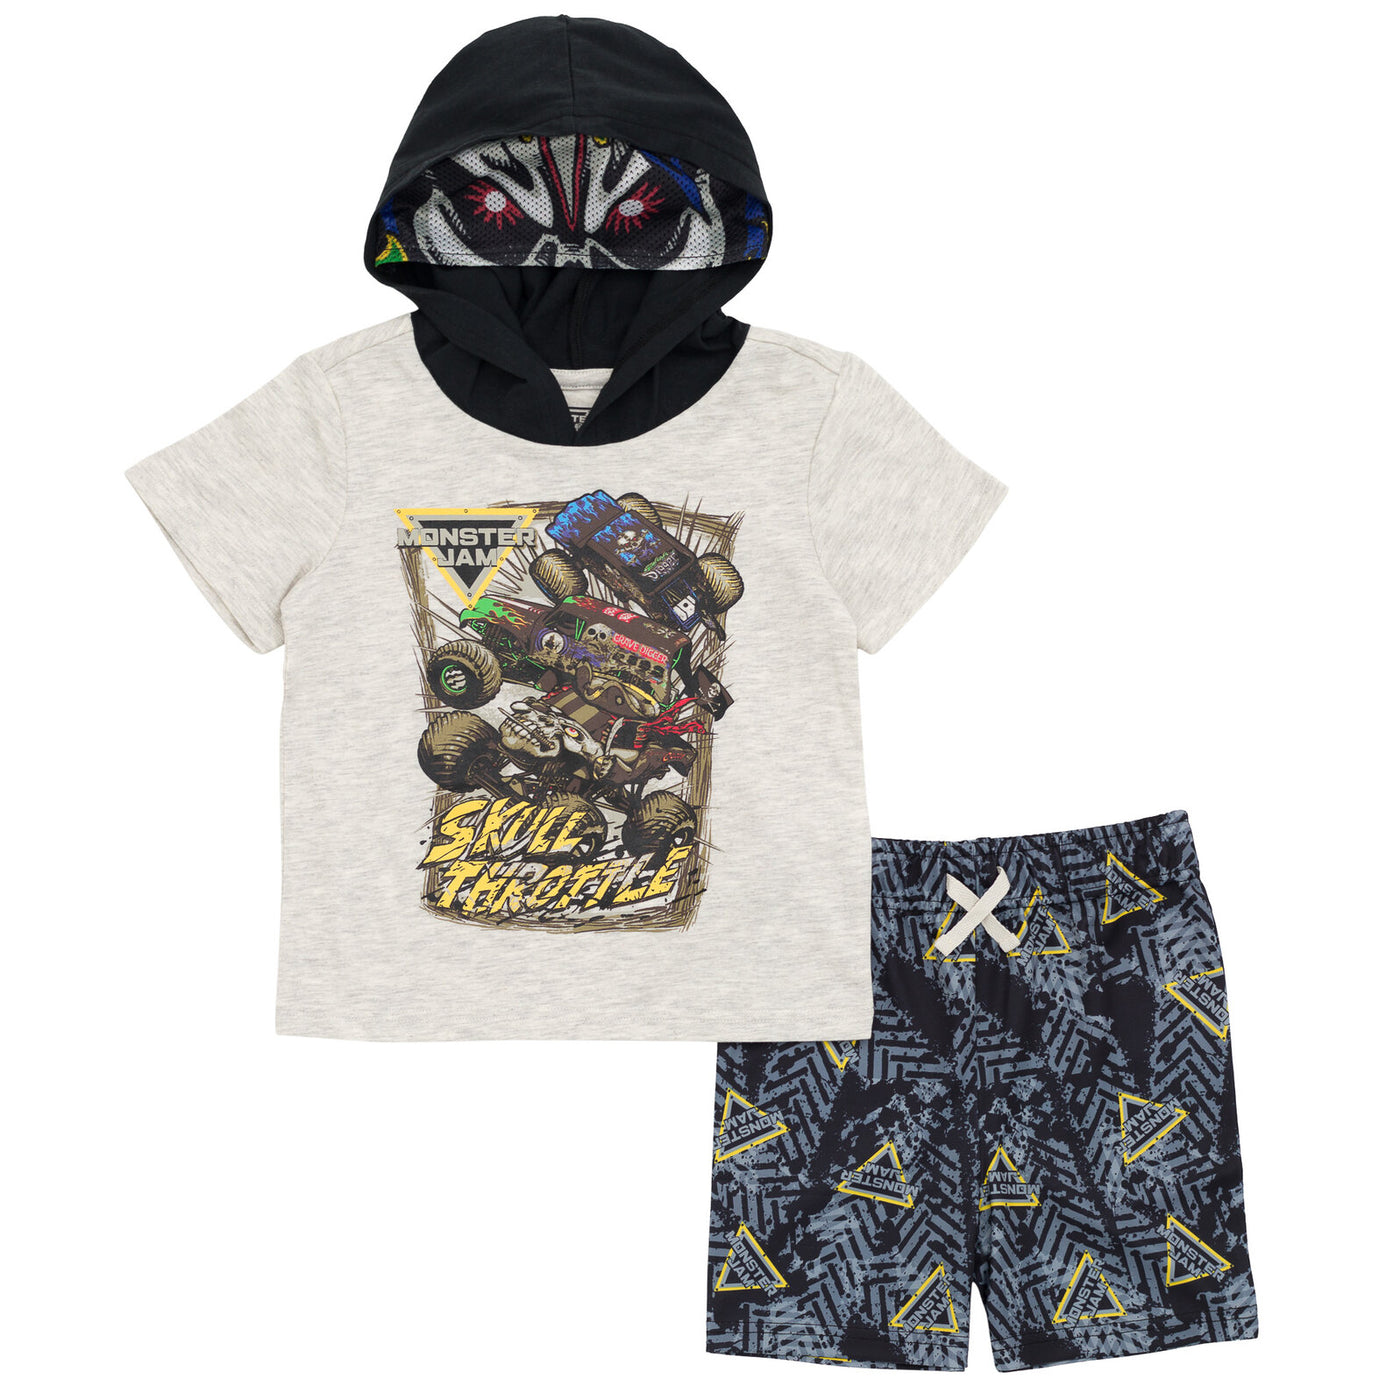 Monster Jam Cosplay T-Shirt and Mesh Shorts Outfit Set